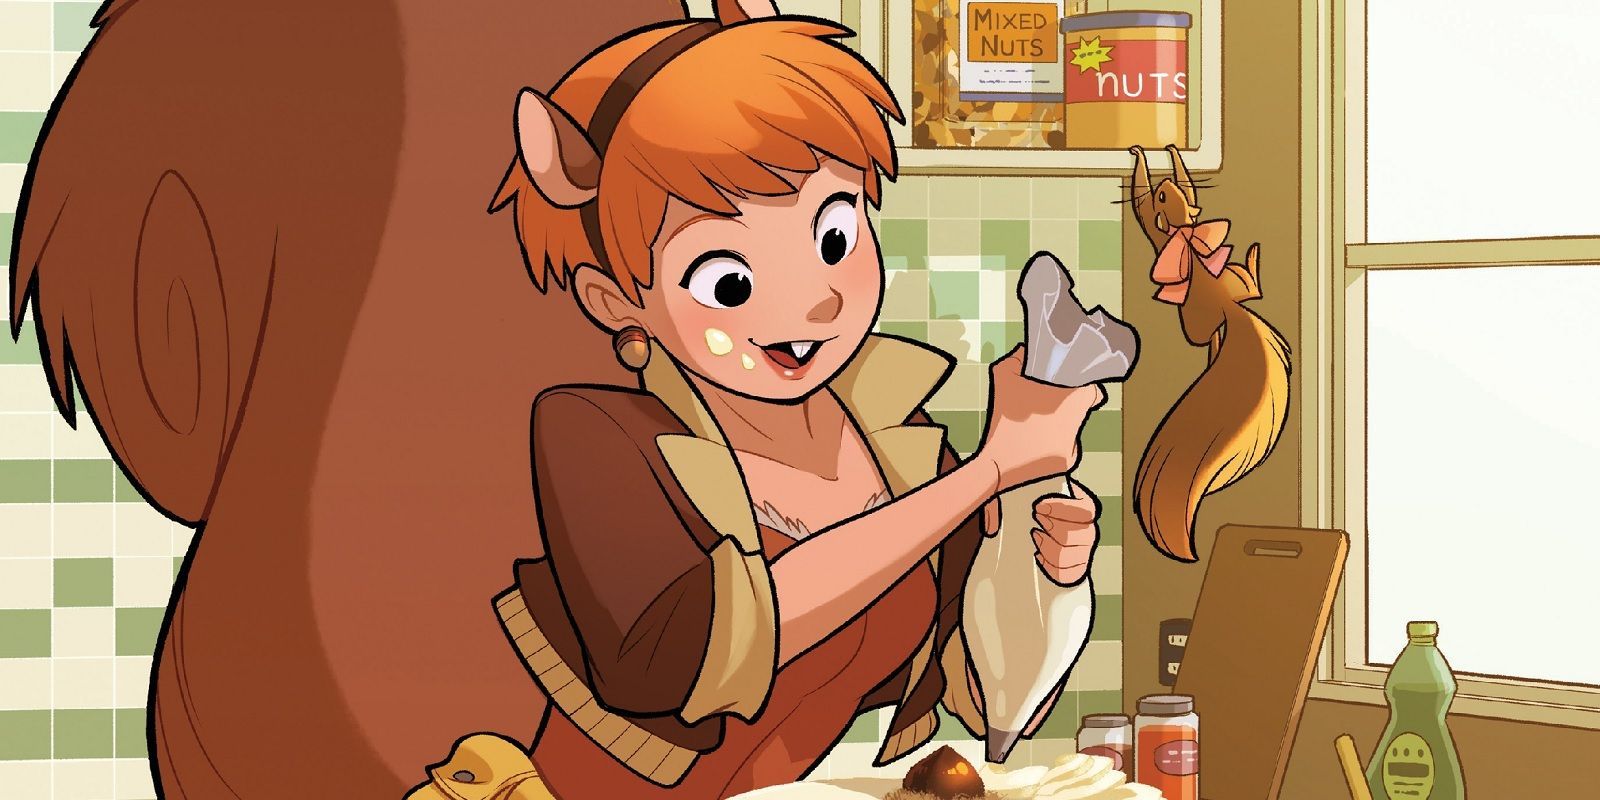 Squirrel Girl has also appeared in Marvel Comics